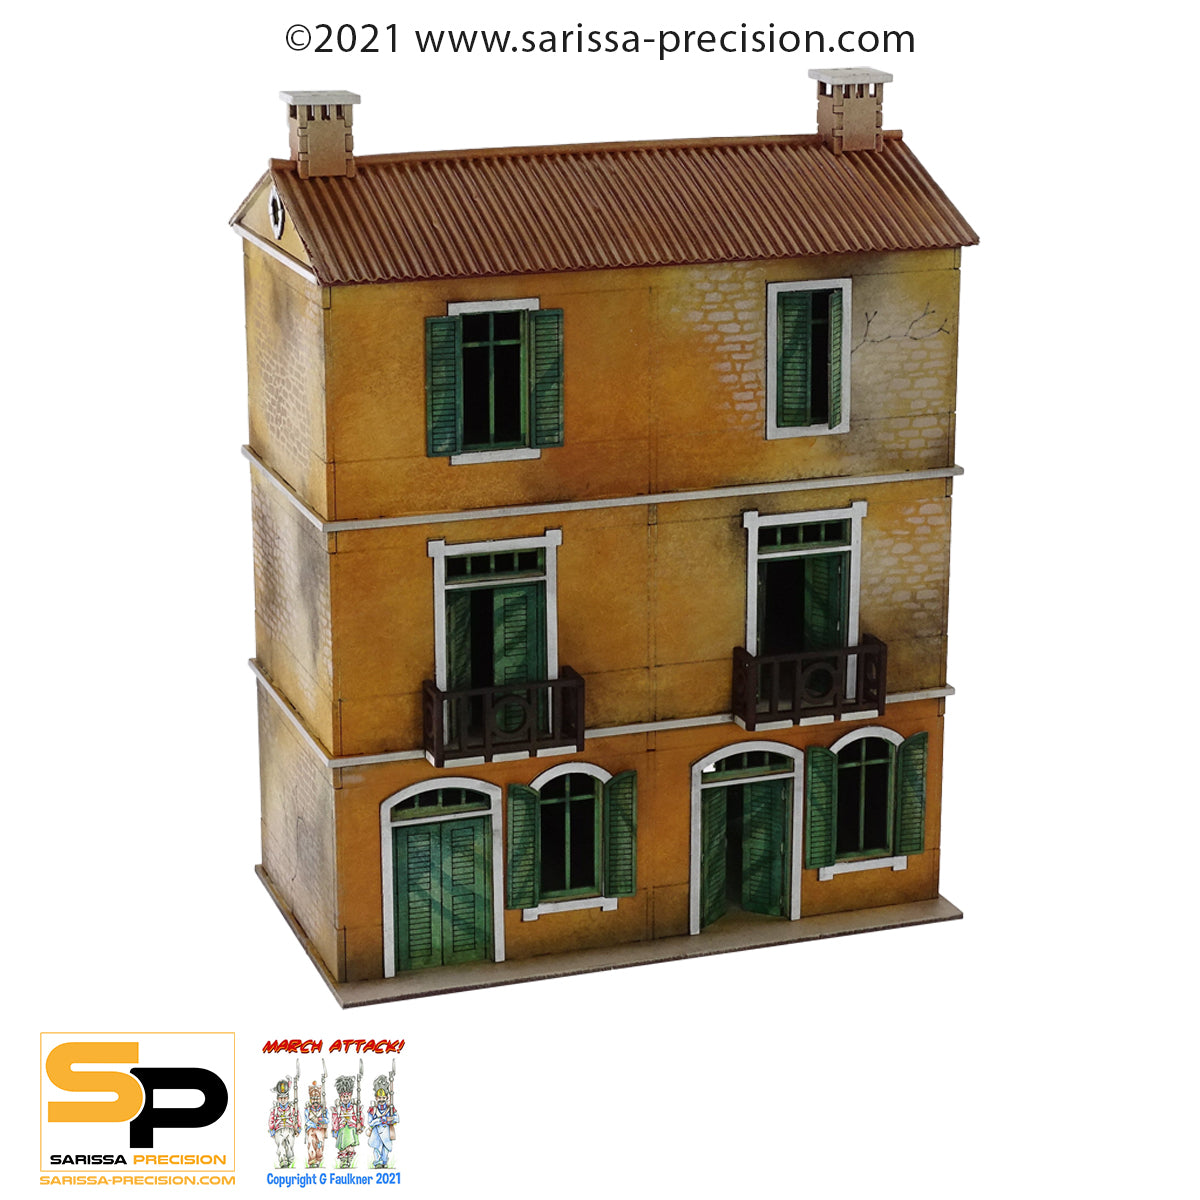 Mediterranean Semi House - 3 Floors with Balcony and Pitched Roof